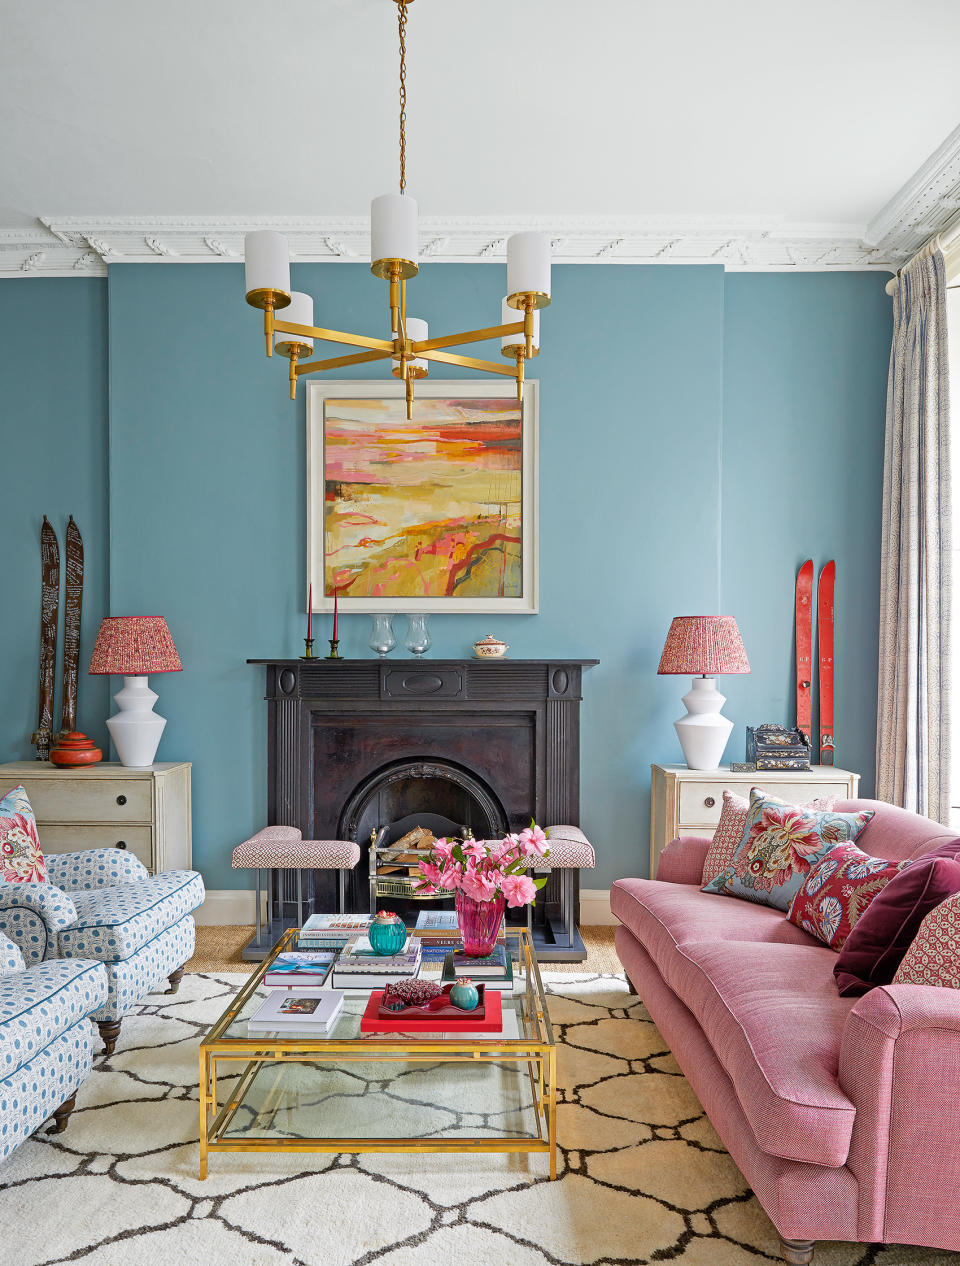 5. Create a focal point with a pink sofa